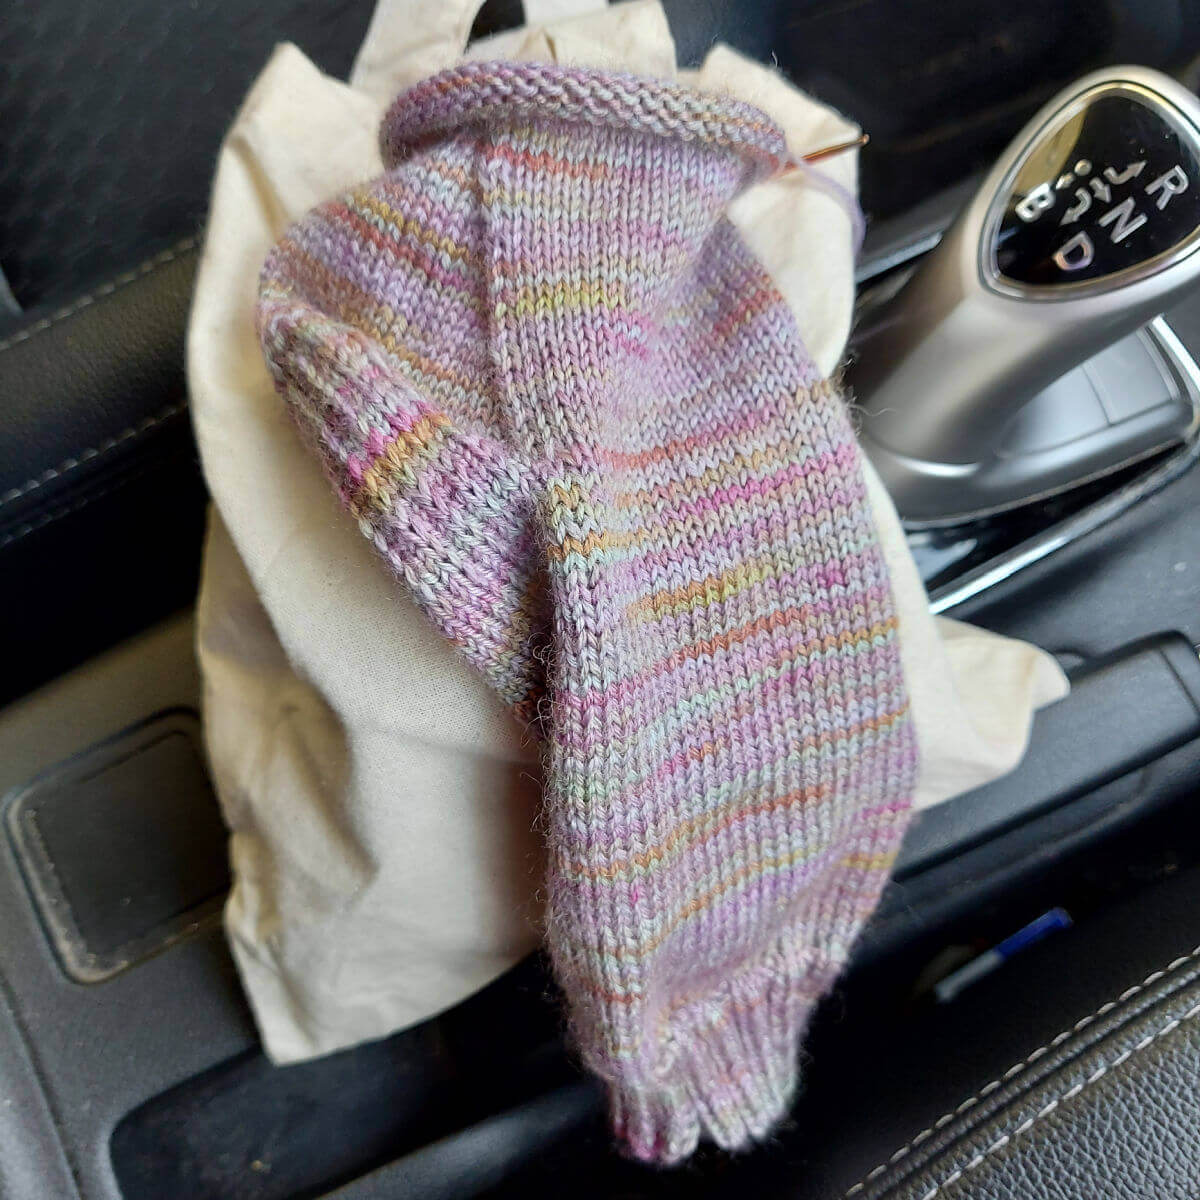 A partly-knitted sock sits on a cream project bag next to a car gear stick.